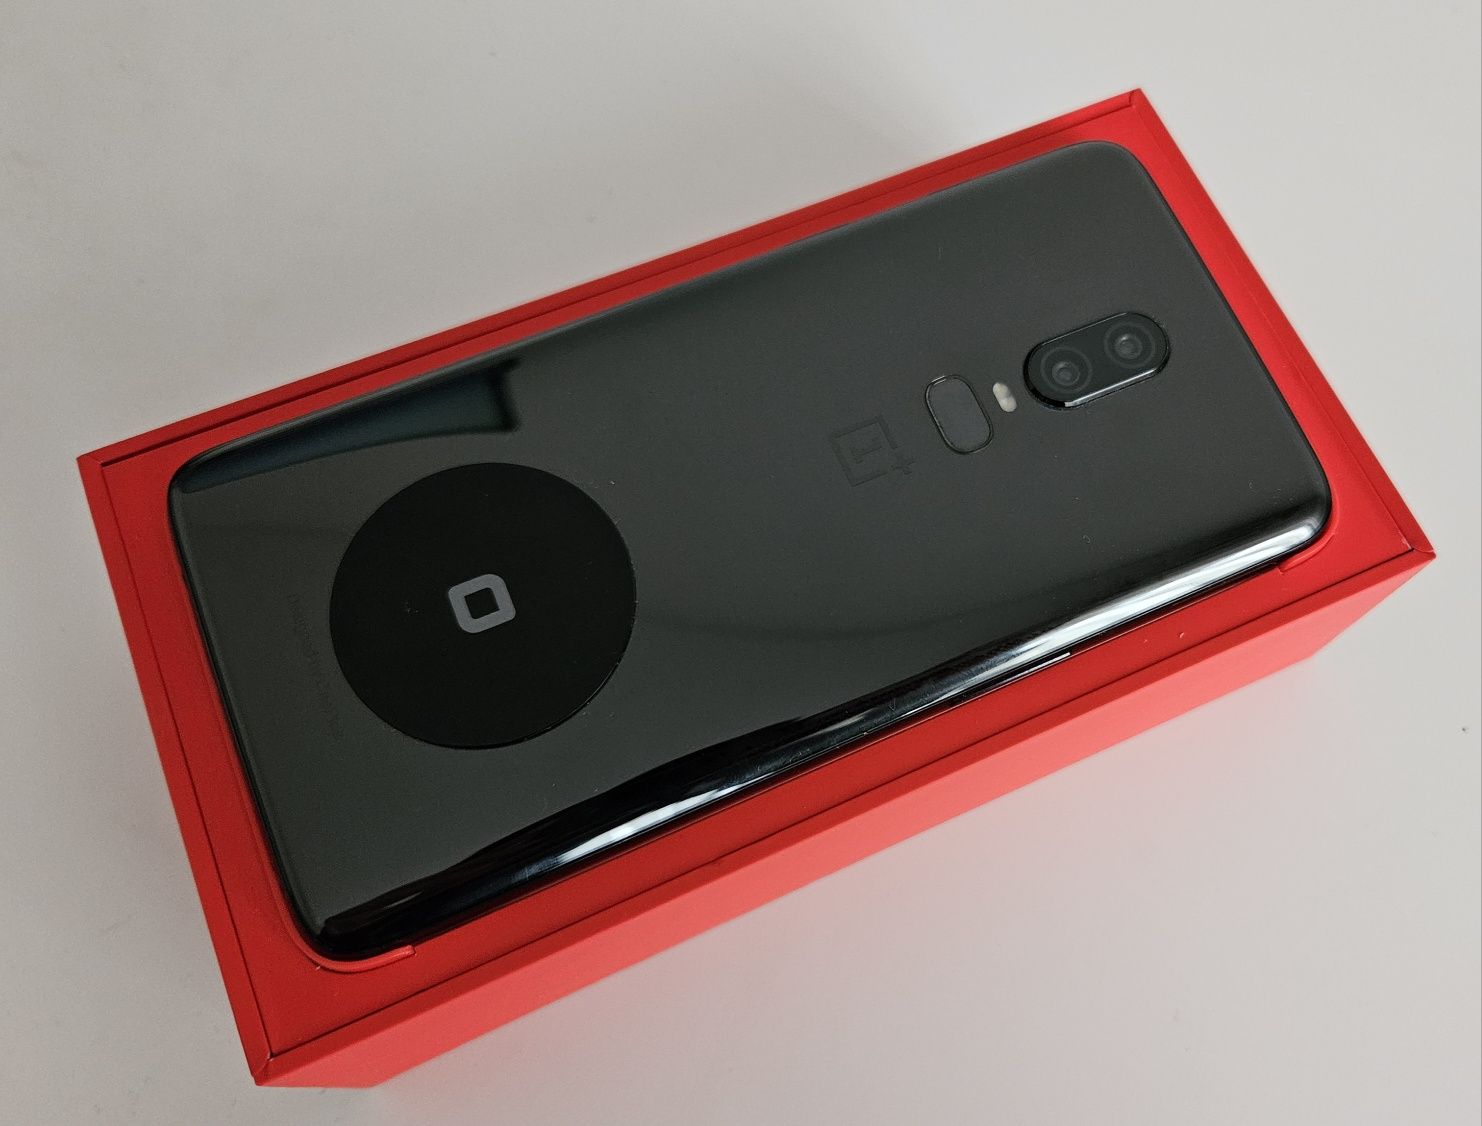 Oneplus 6, 64GB, Mirror Black (upgradable Android 11)